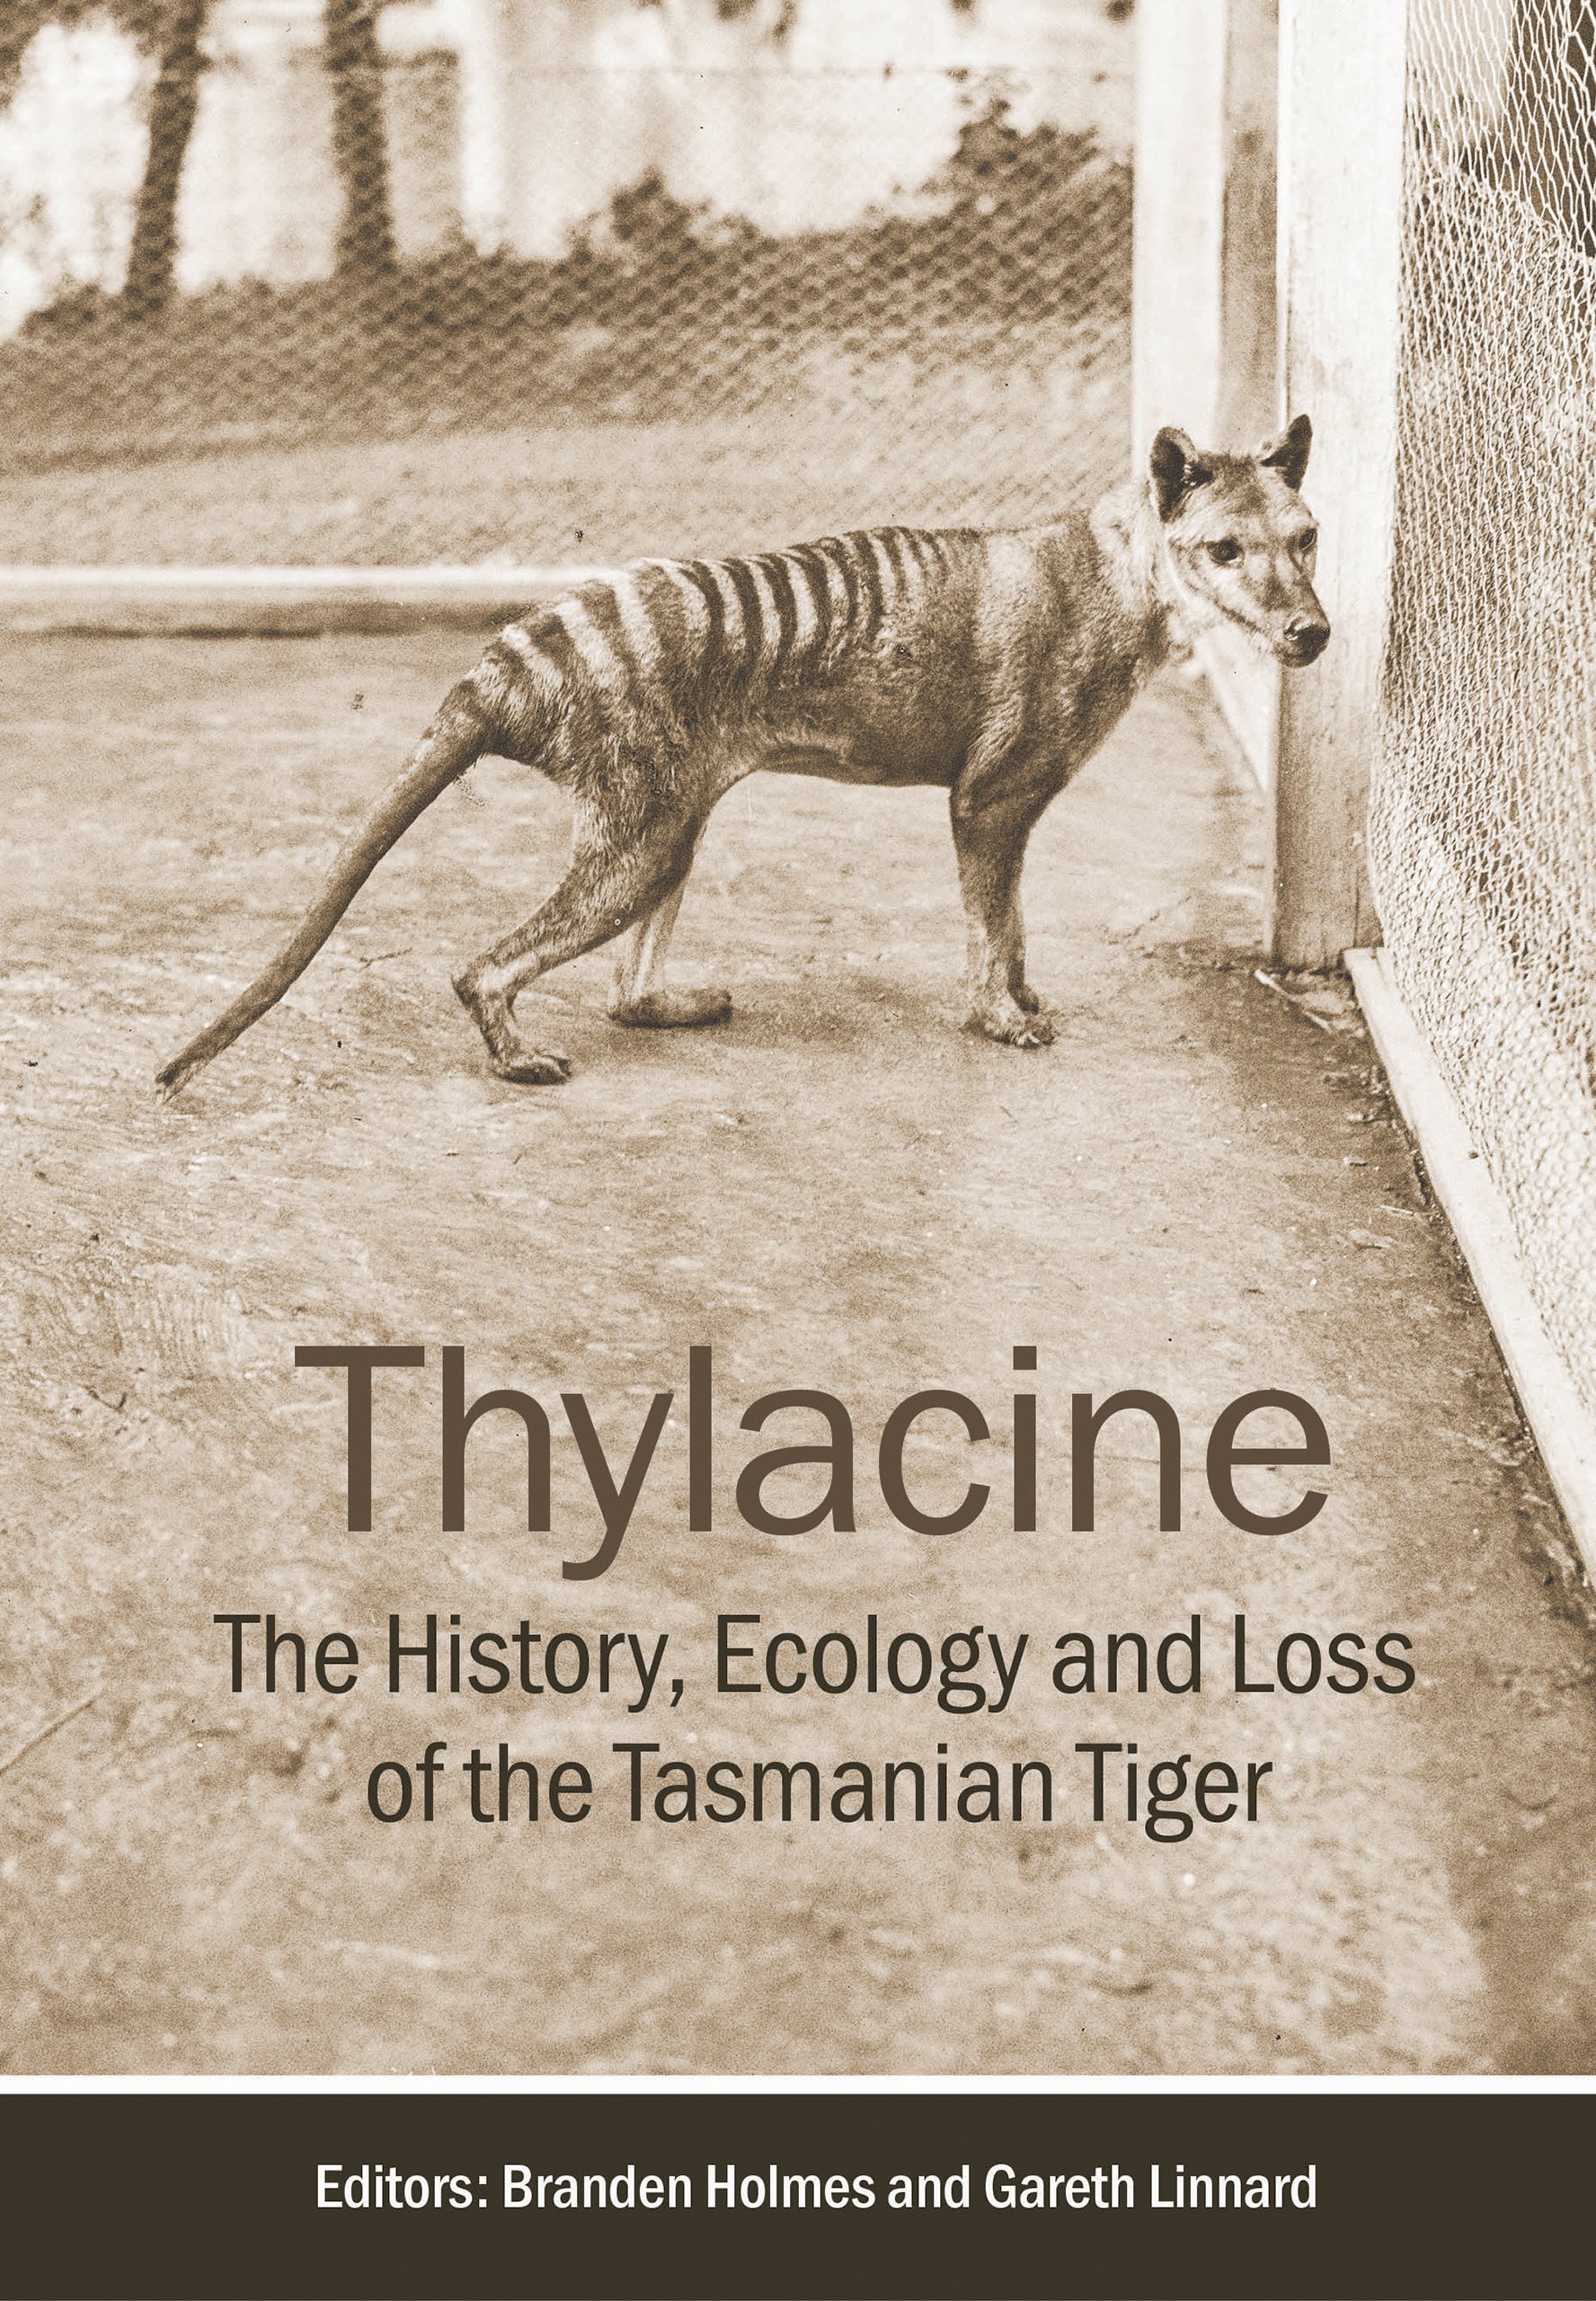 Thylacine - the history, ecology and loss of the Tasmanian Tiger